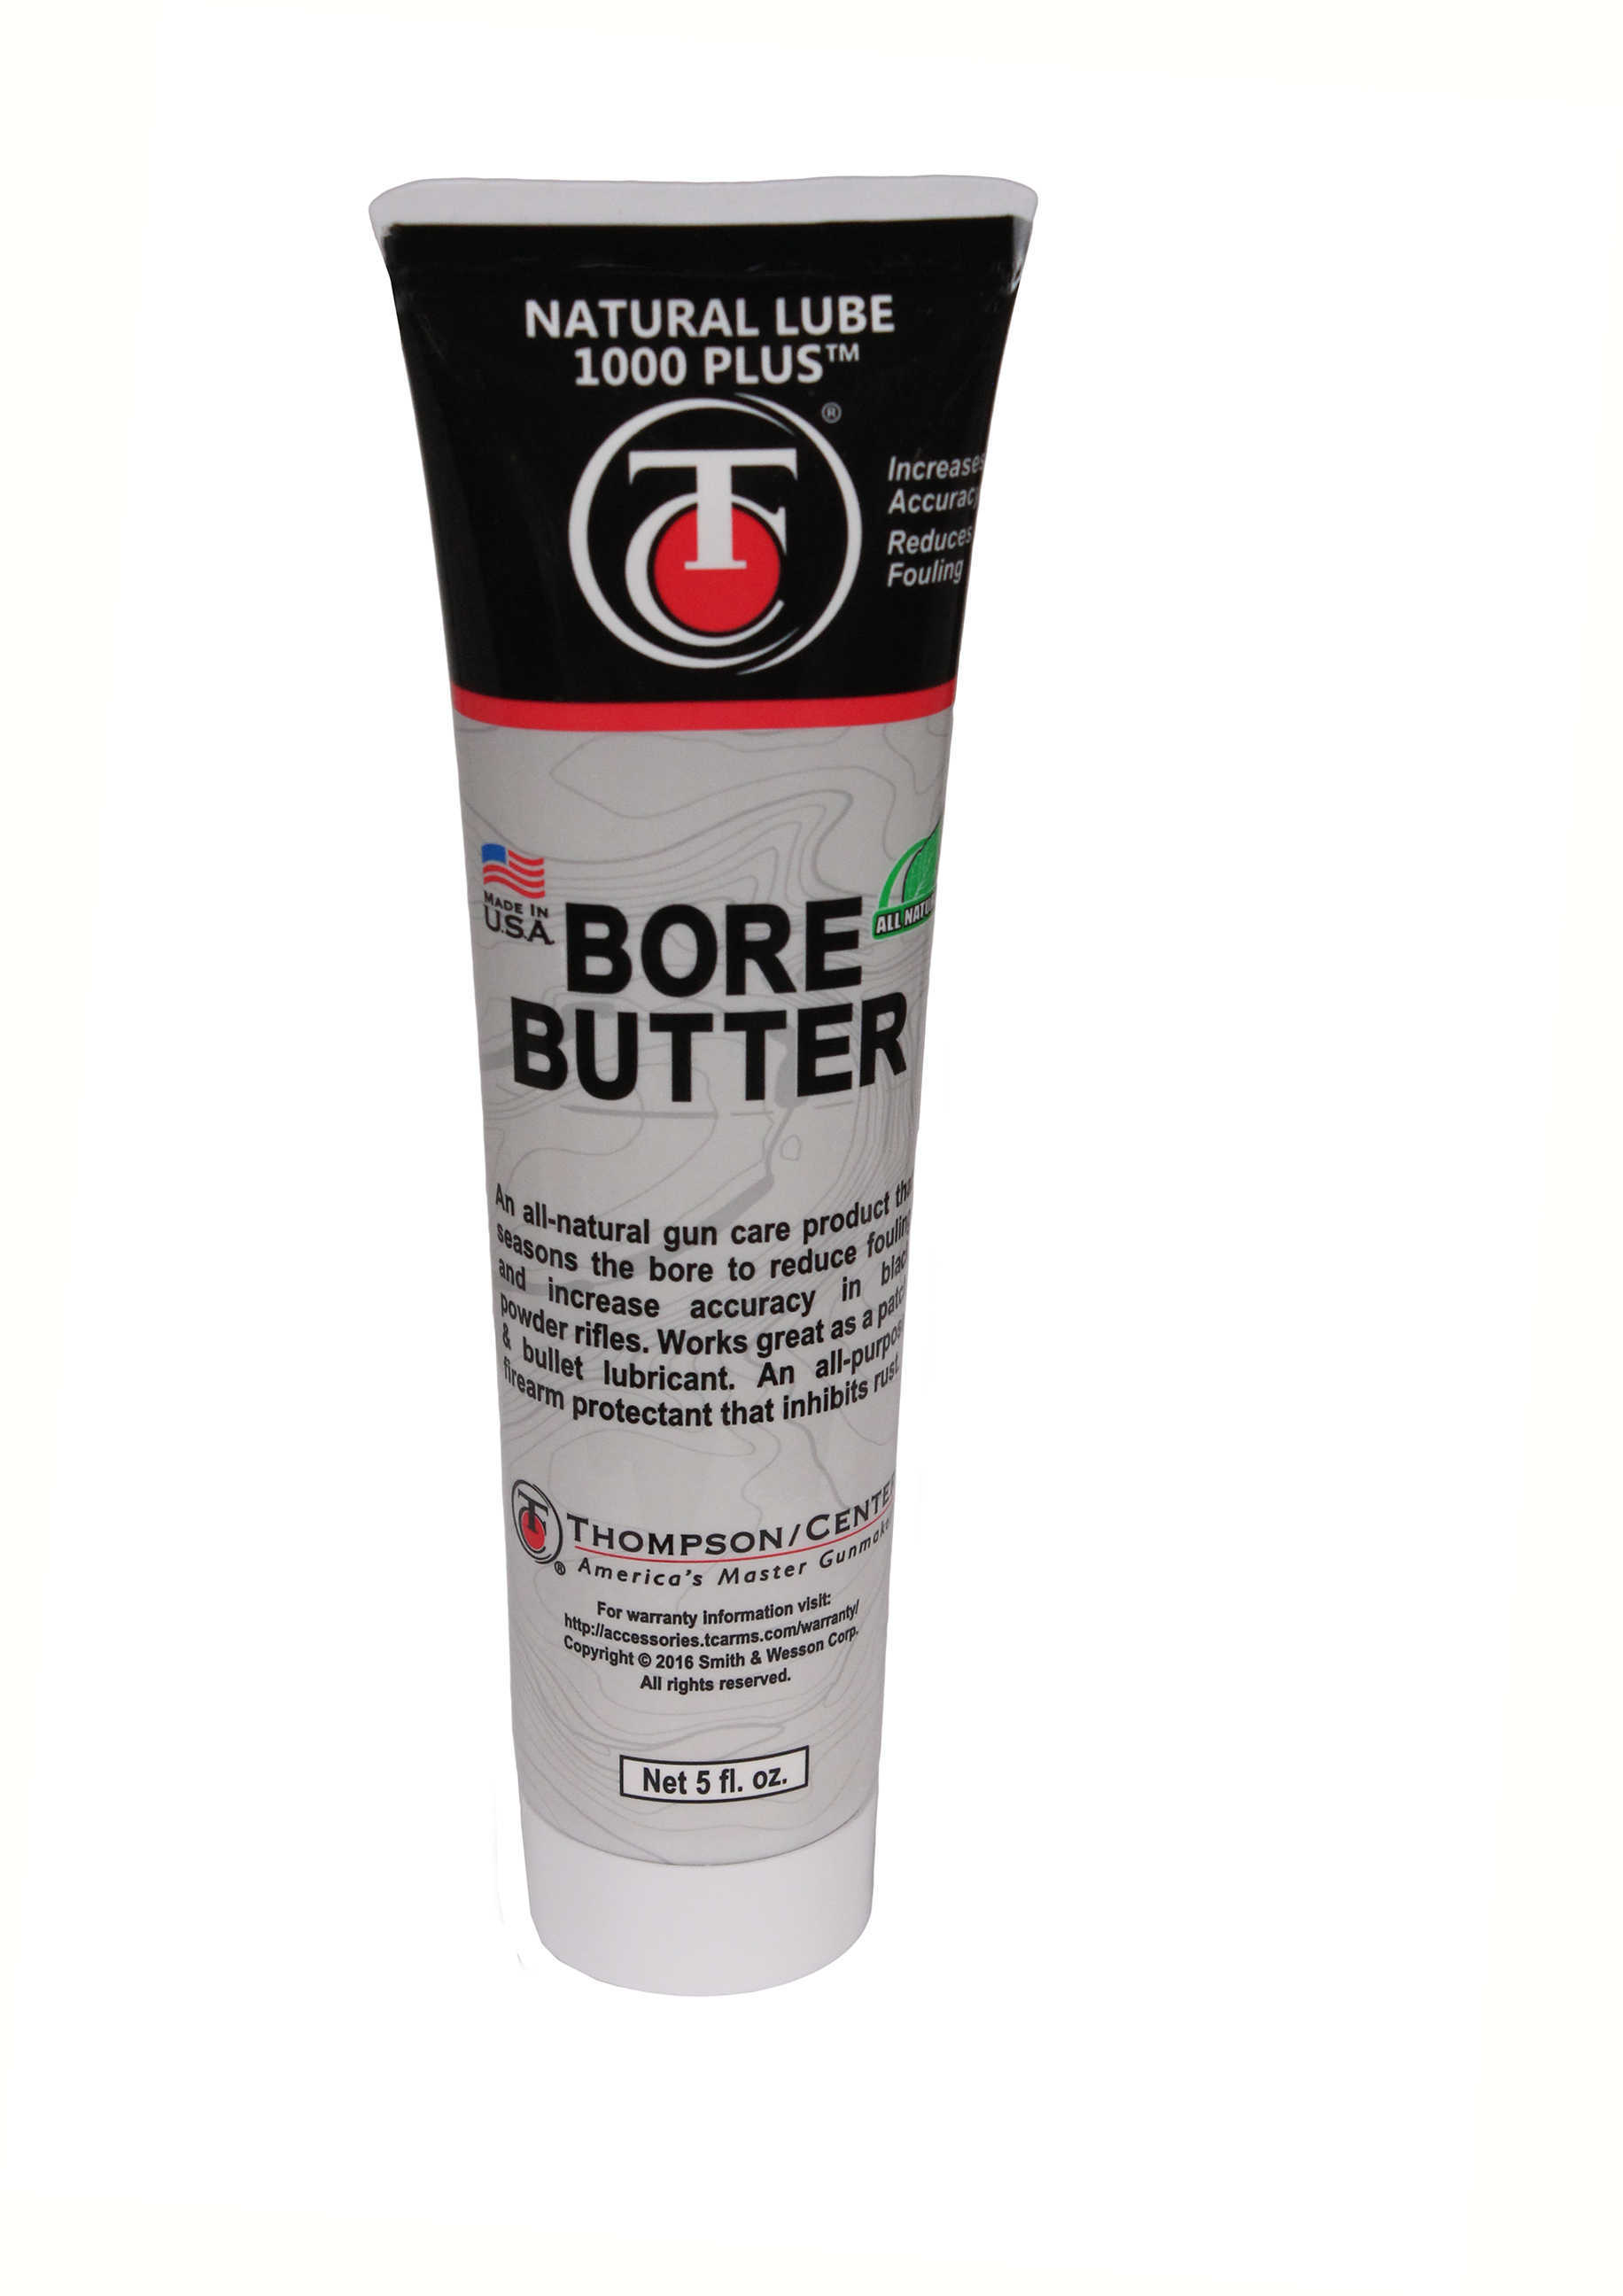 Thompson/Center Arms Natural Lube 1000 Plus "Bore Butter" IN A Tube (5oz) 7309